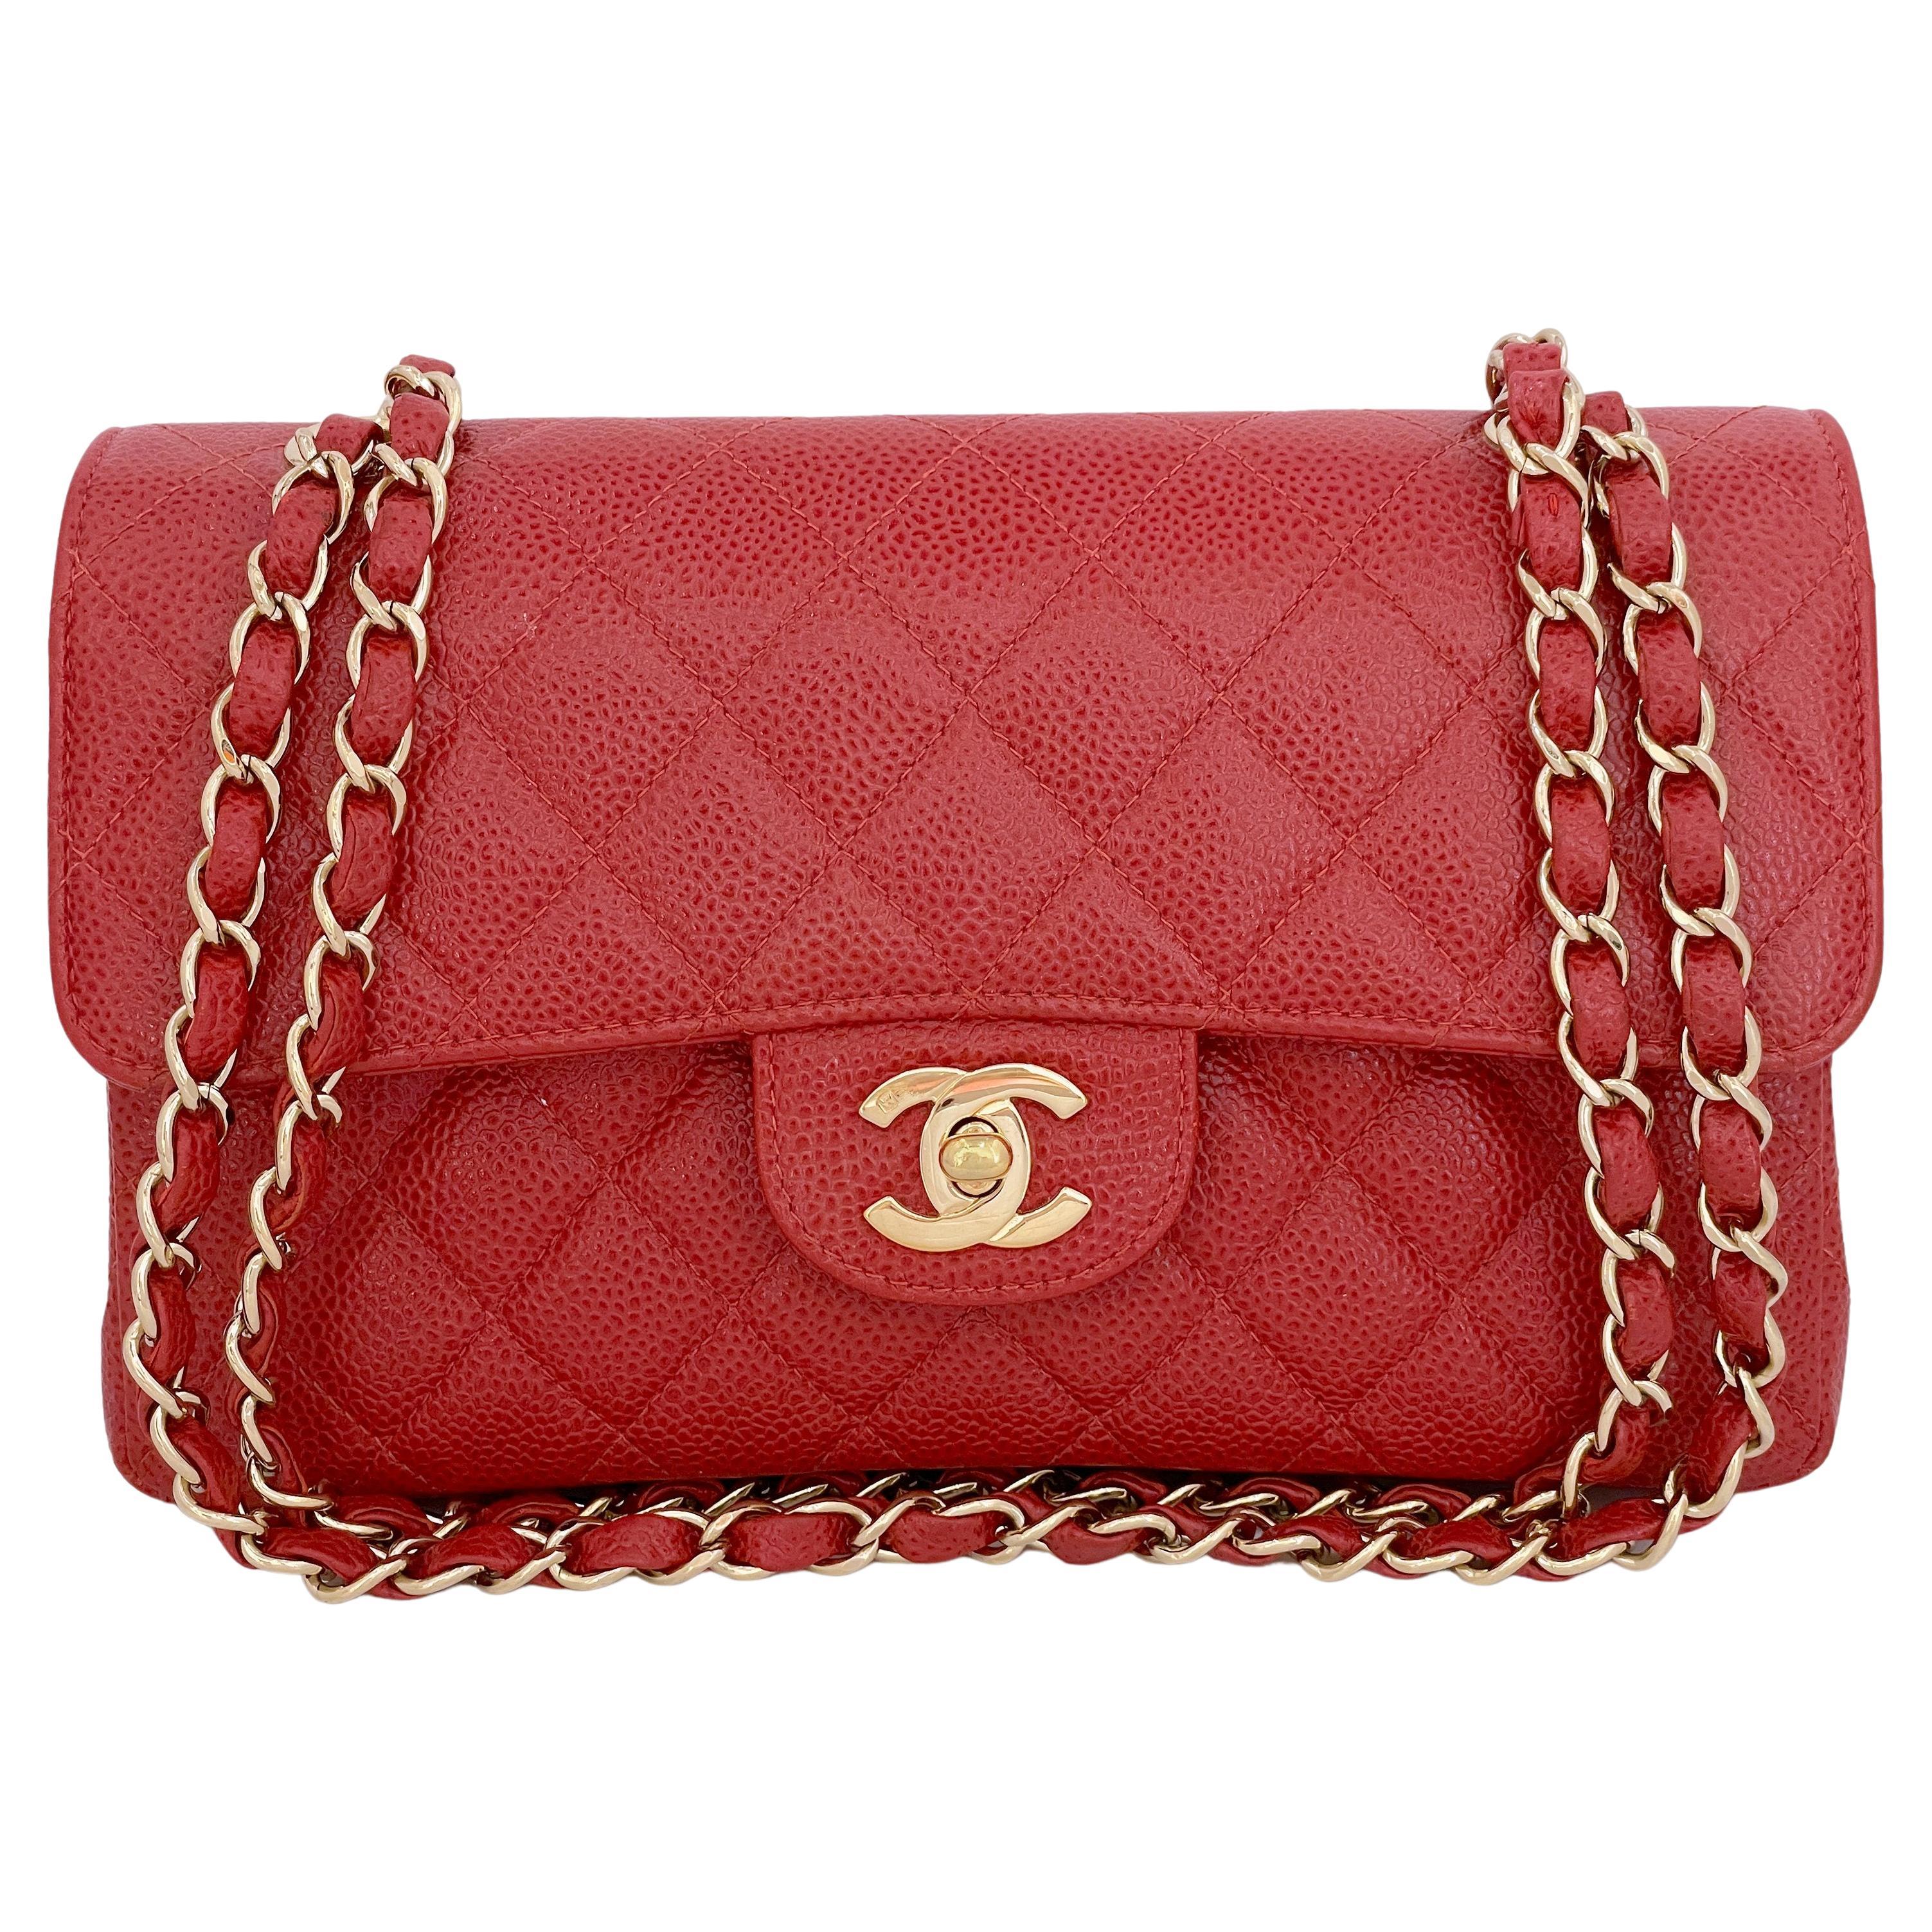 chanel small flap bag pink